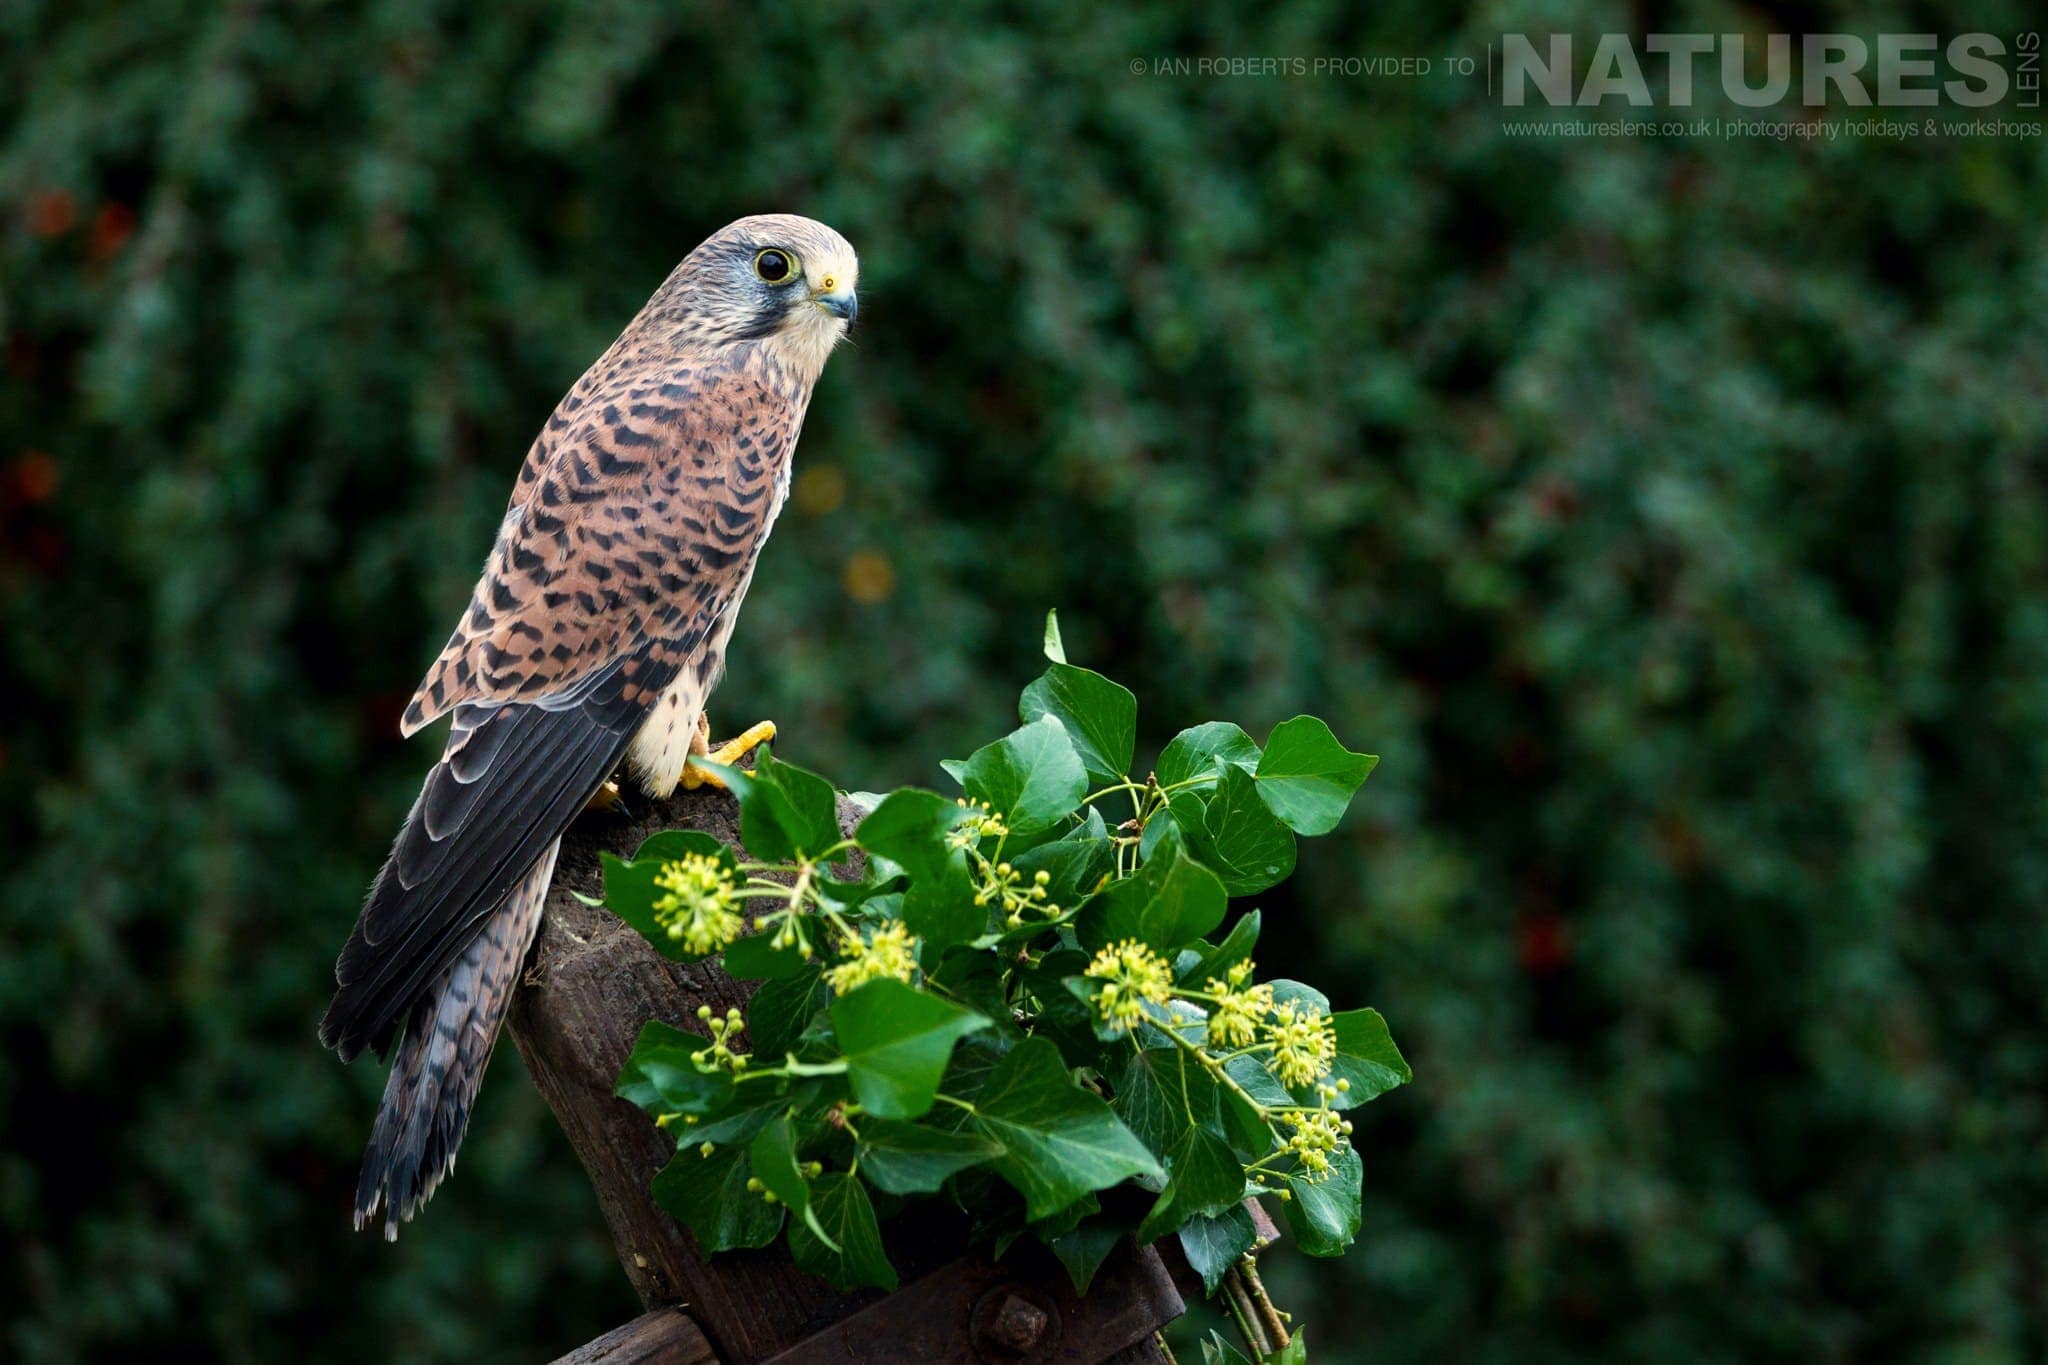 An image of one of the kestrels perched on a gate post captured by Ian Roberts on the NaturesLens Autumn Birds of Prey Photography Workshop